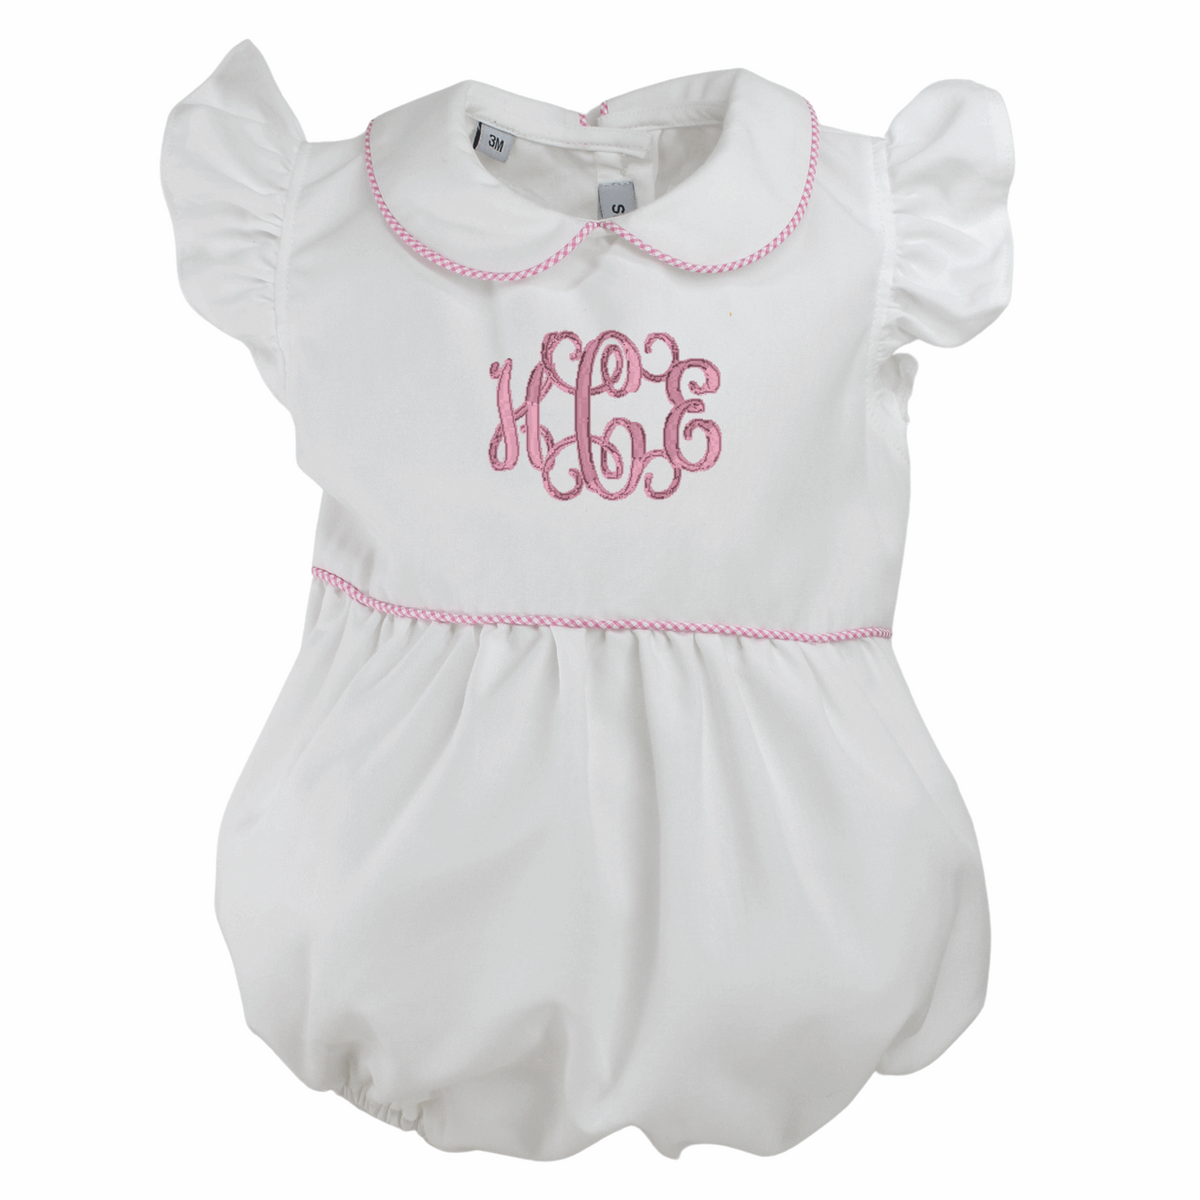 Baby Girls White Bubble Outfit Pink Gingham Trim